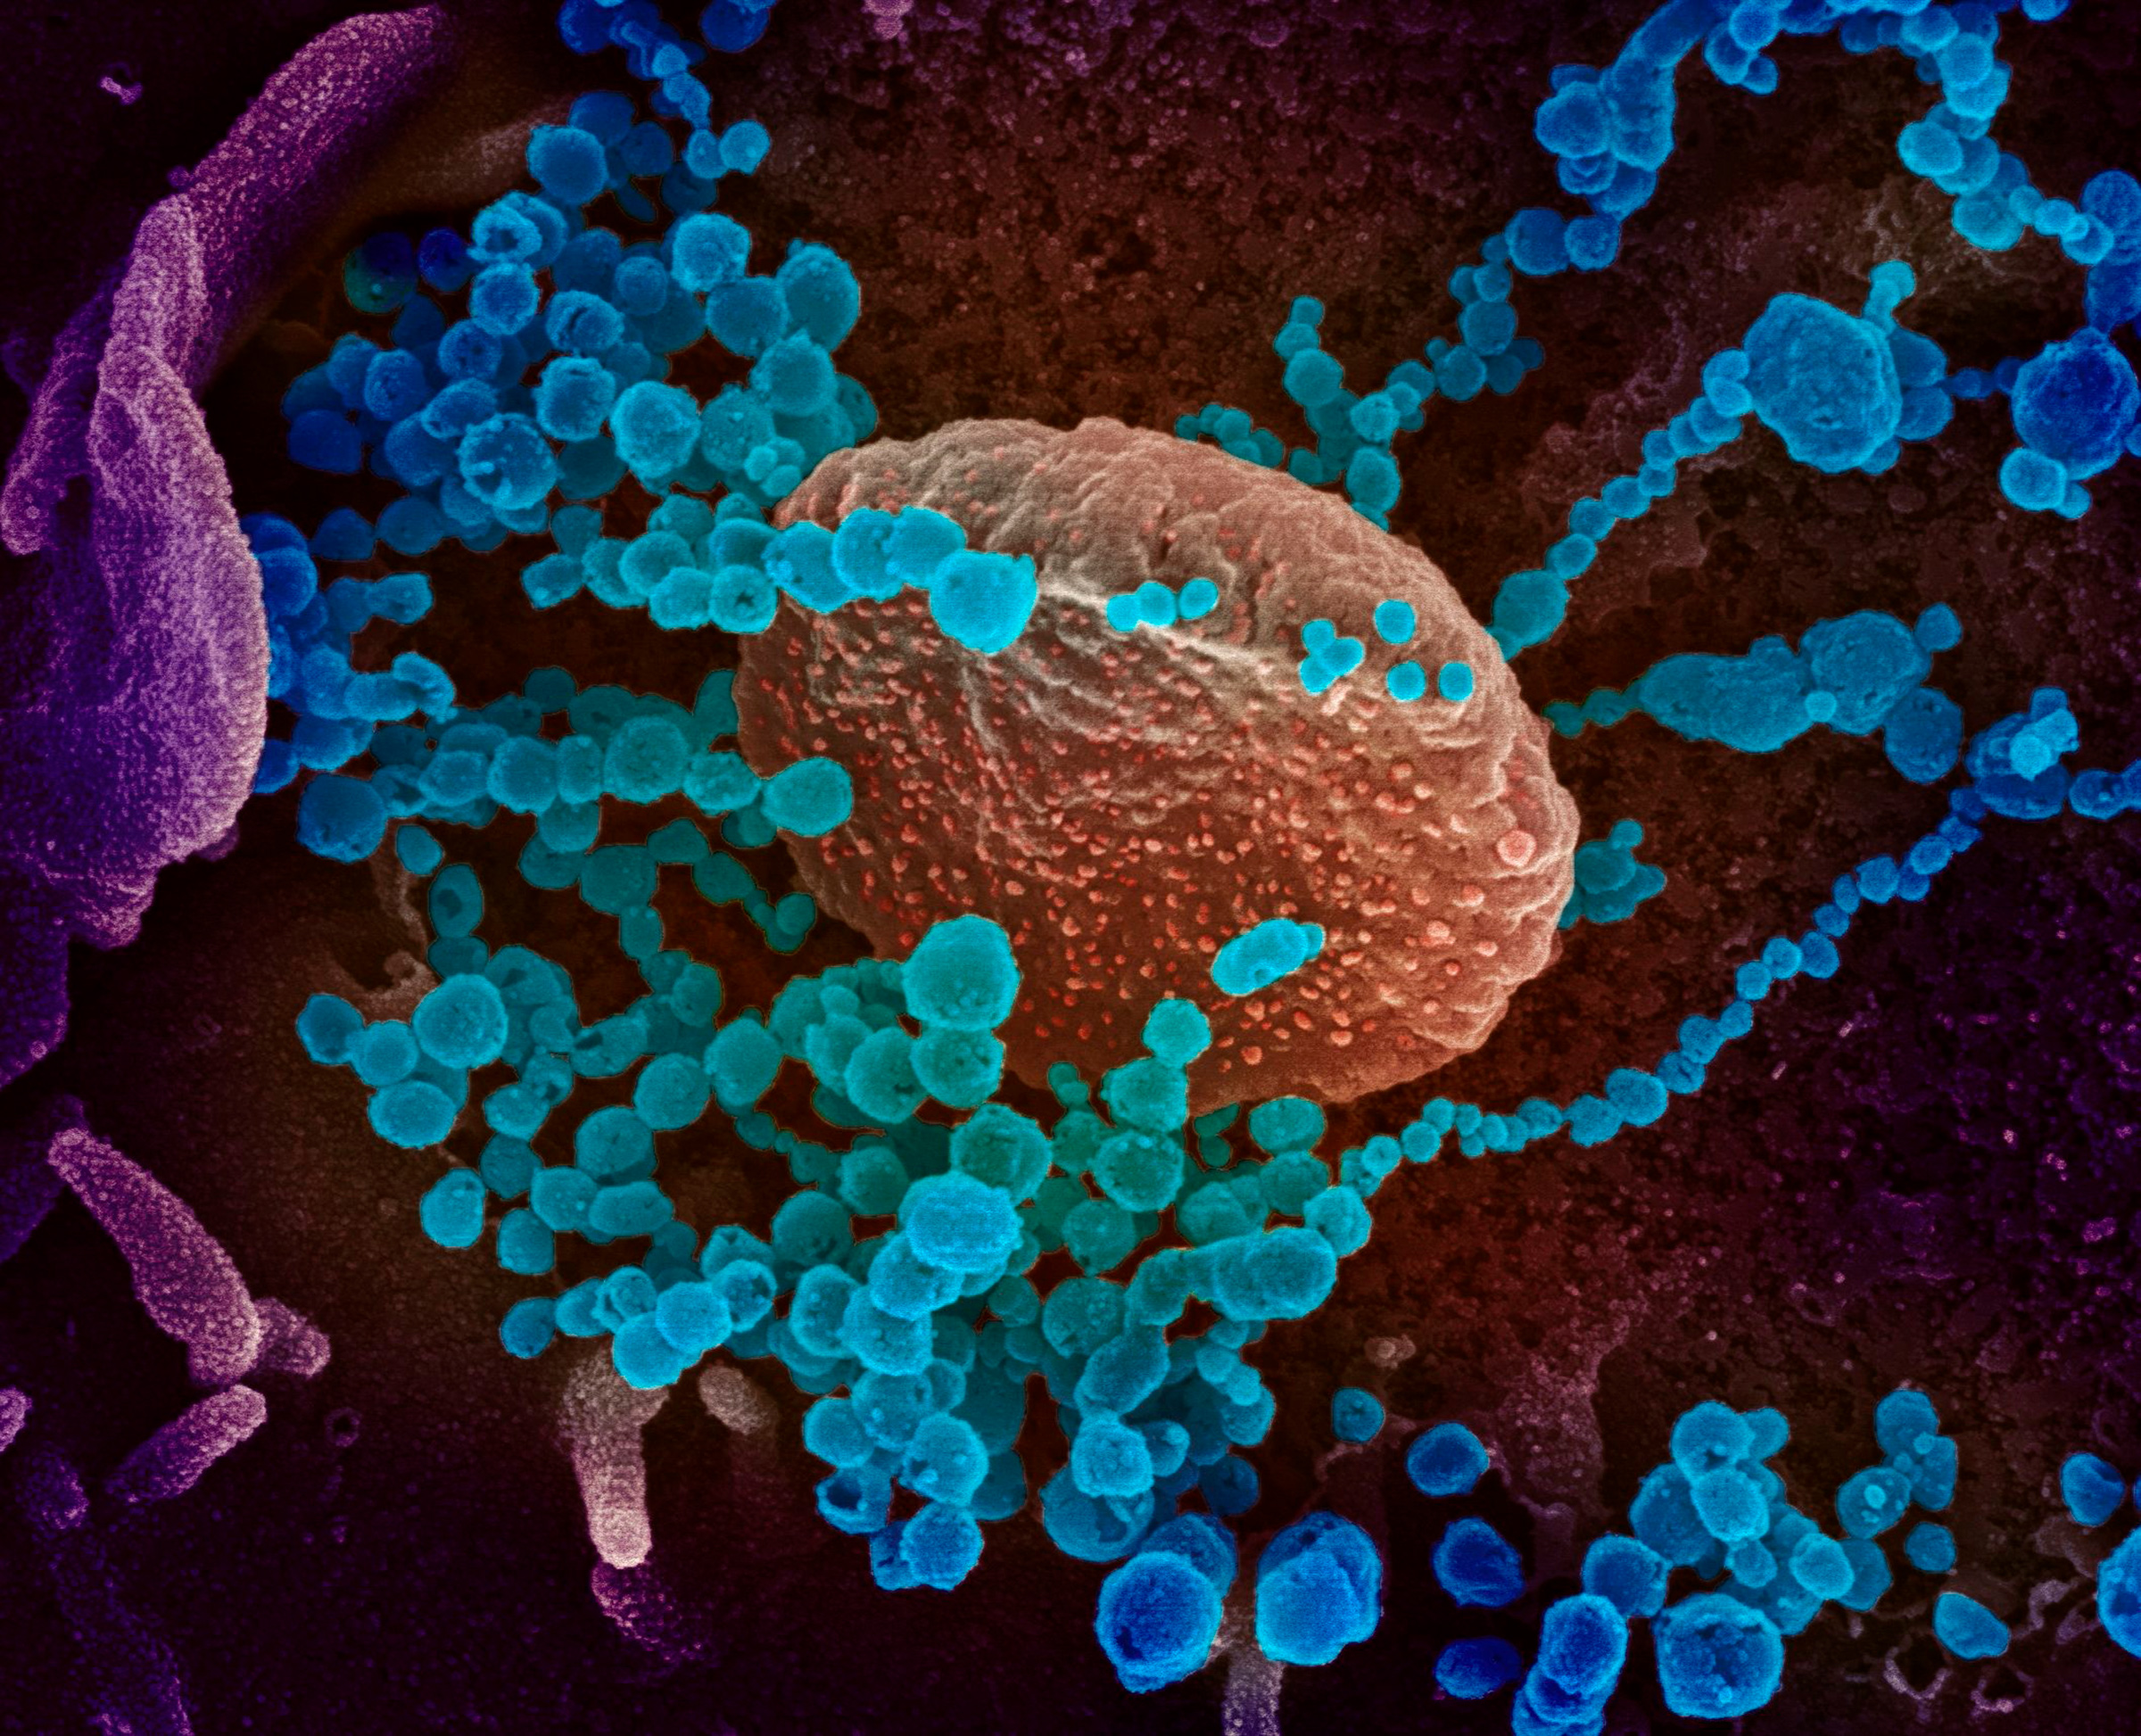 This image obtained on March 12 shows a scanning electron microscope image of SARS-CoV-2 (round blue objects) emerging from the surface of cells cultured in the lab, SARS-CoV-2, also known as 2019-nCoV, is the virus that causes COVID-19, the virus shown was isolated from a patient in the U.S. (National Institutes of Health/AFP/Getty Images)